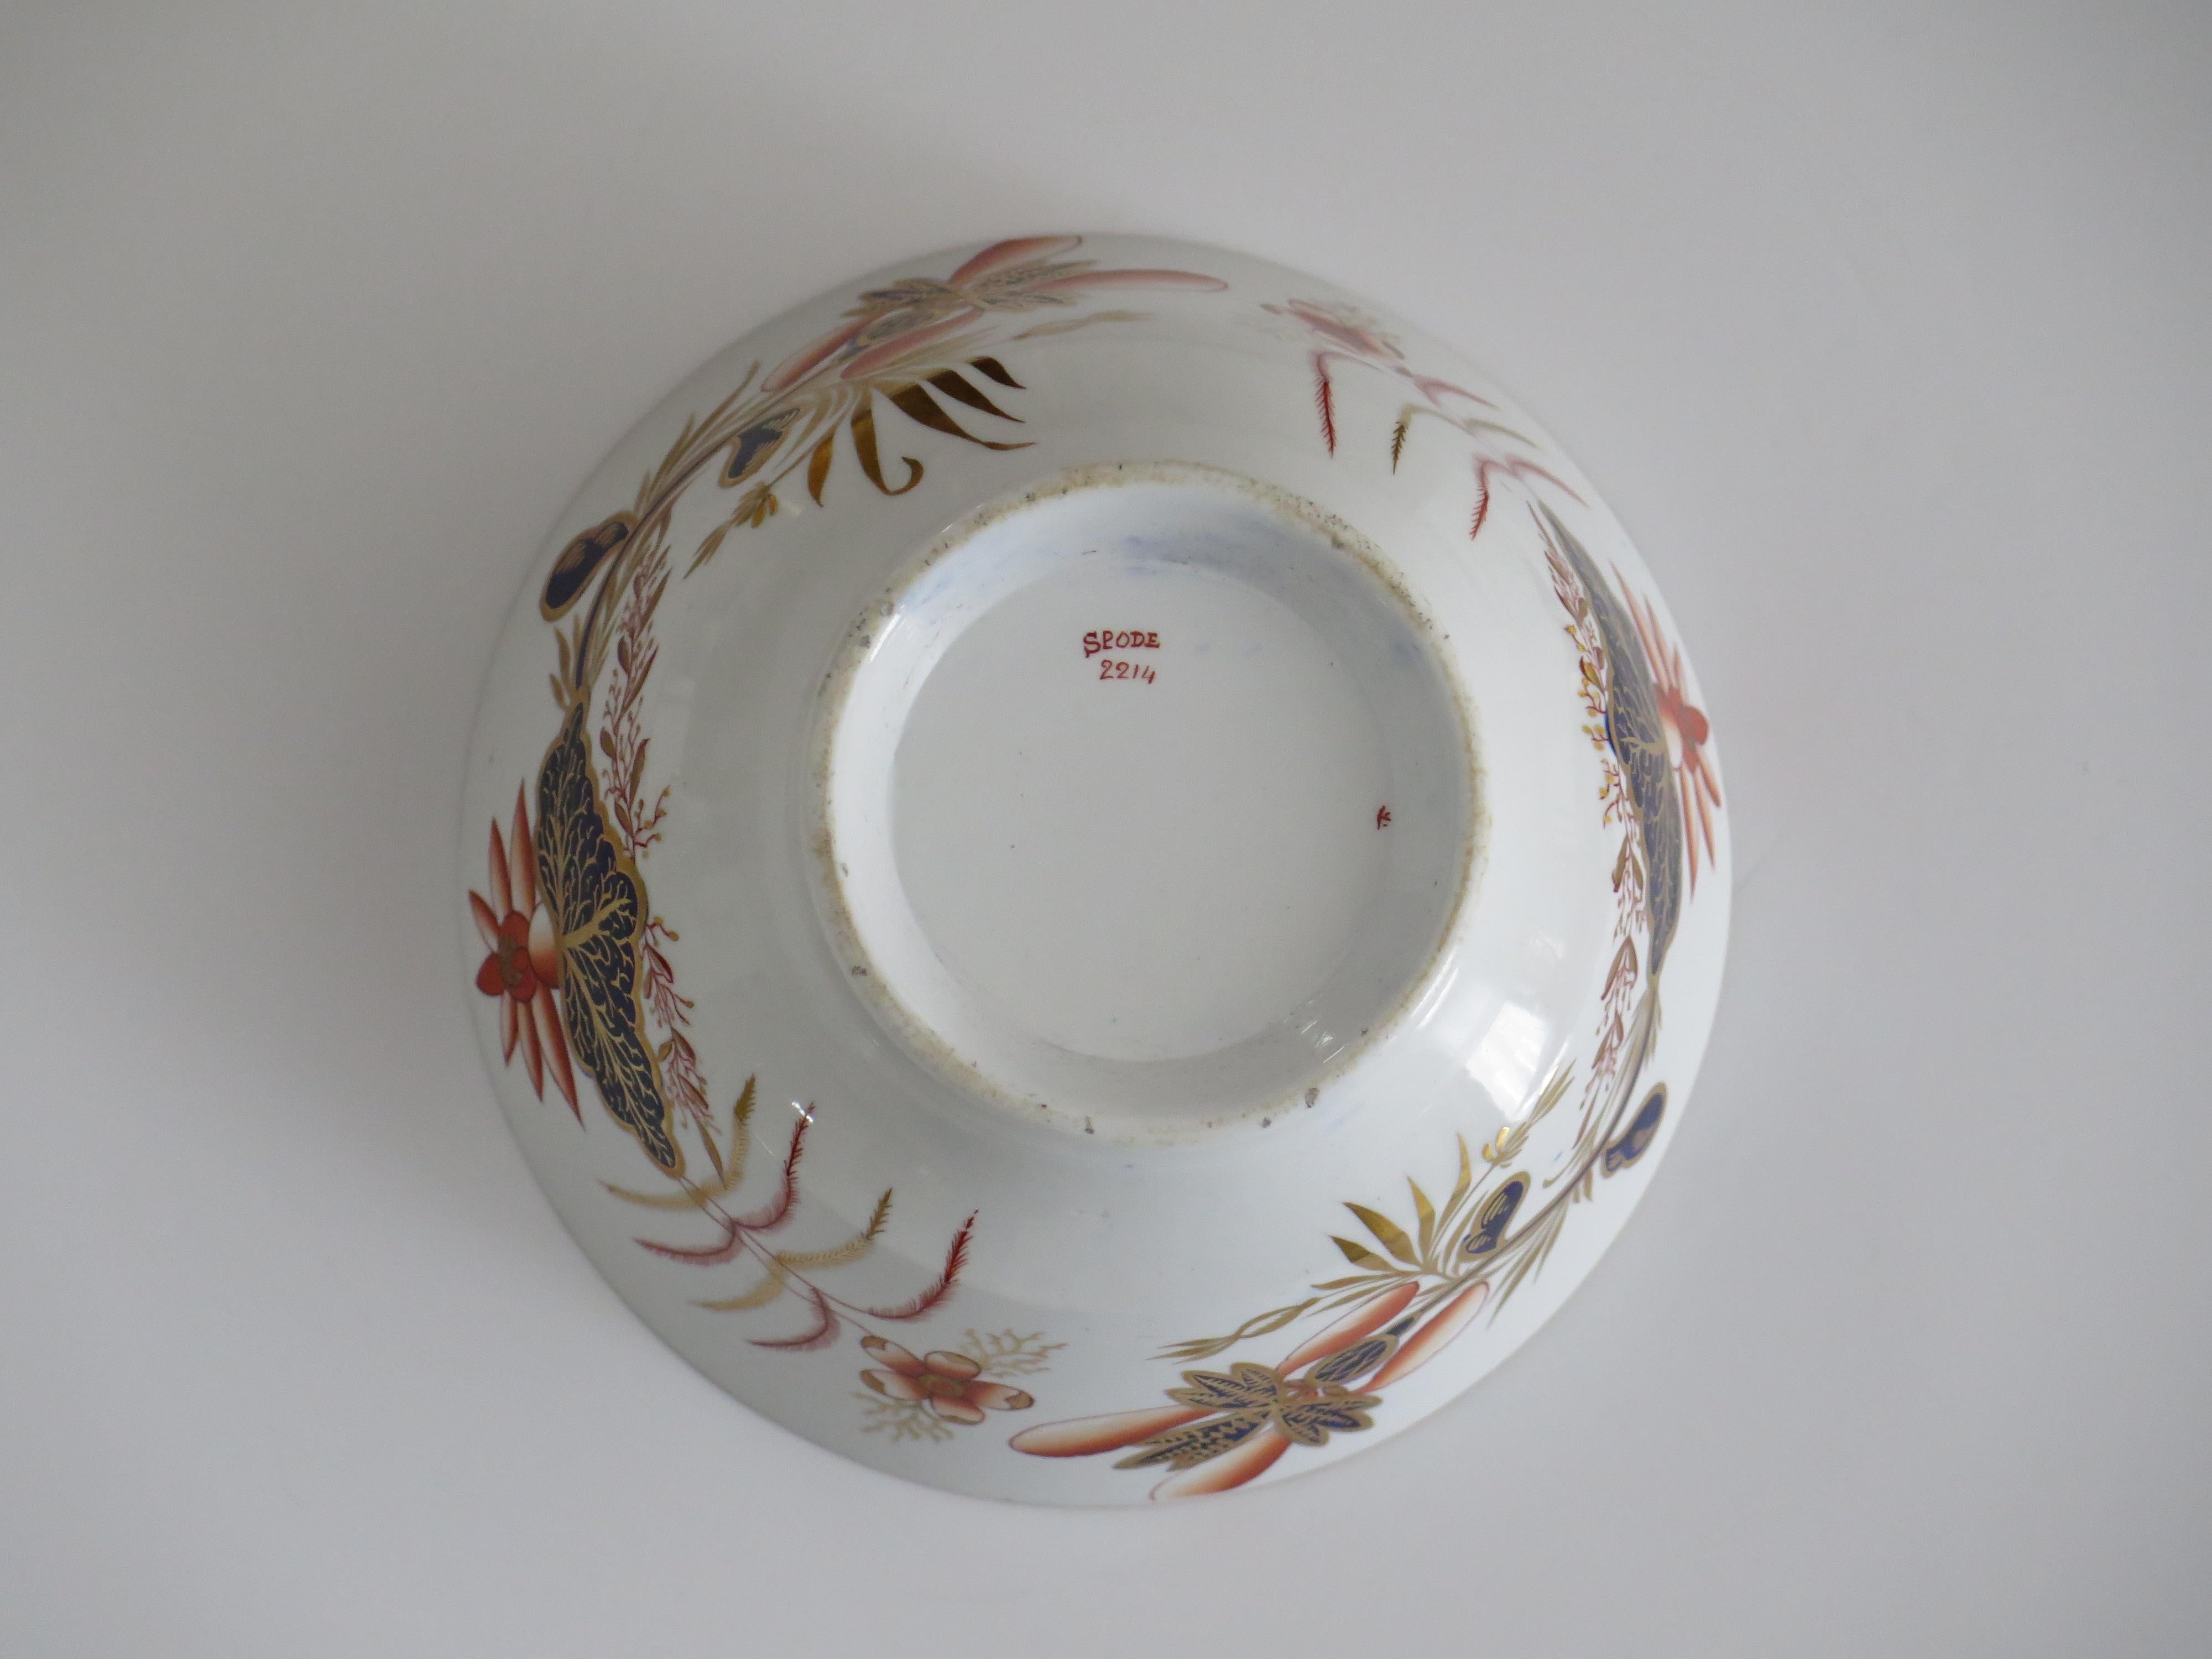 Early 19th Century Spode Porcelain Slop Bowl in gilded Pattern 2214, Ca 1810 For Sale 7